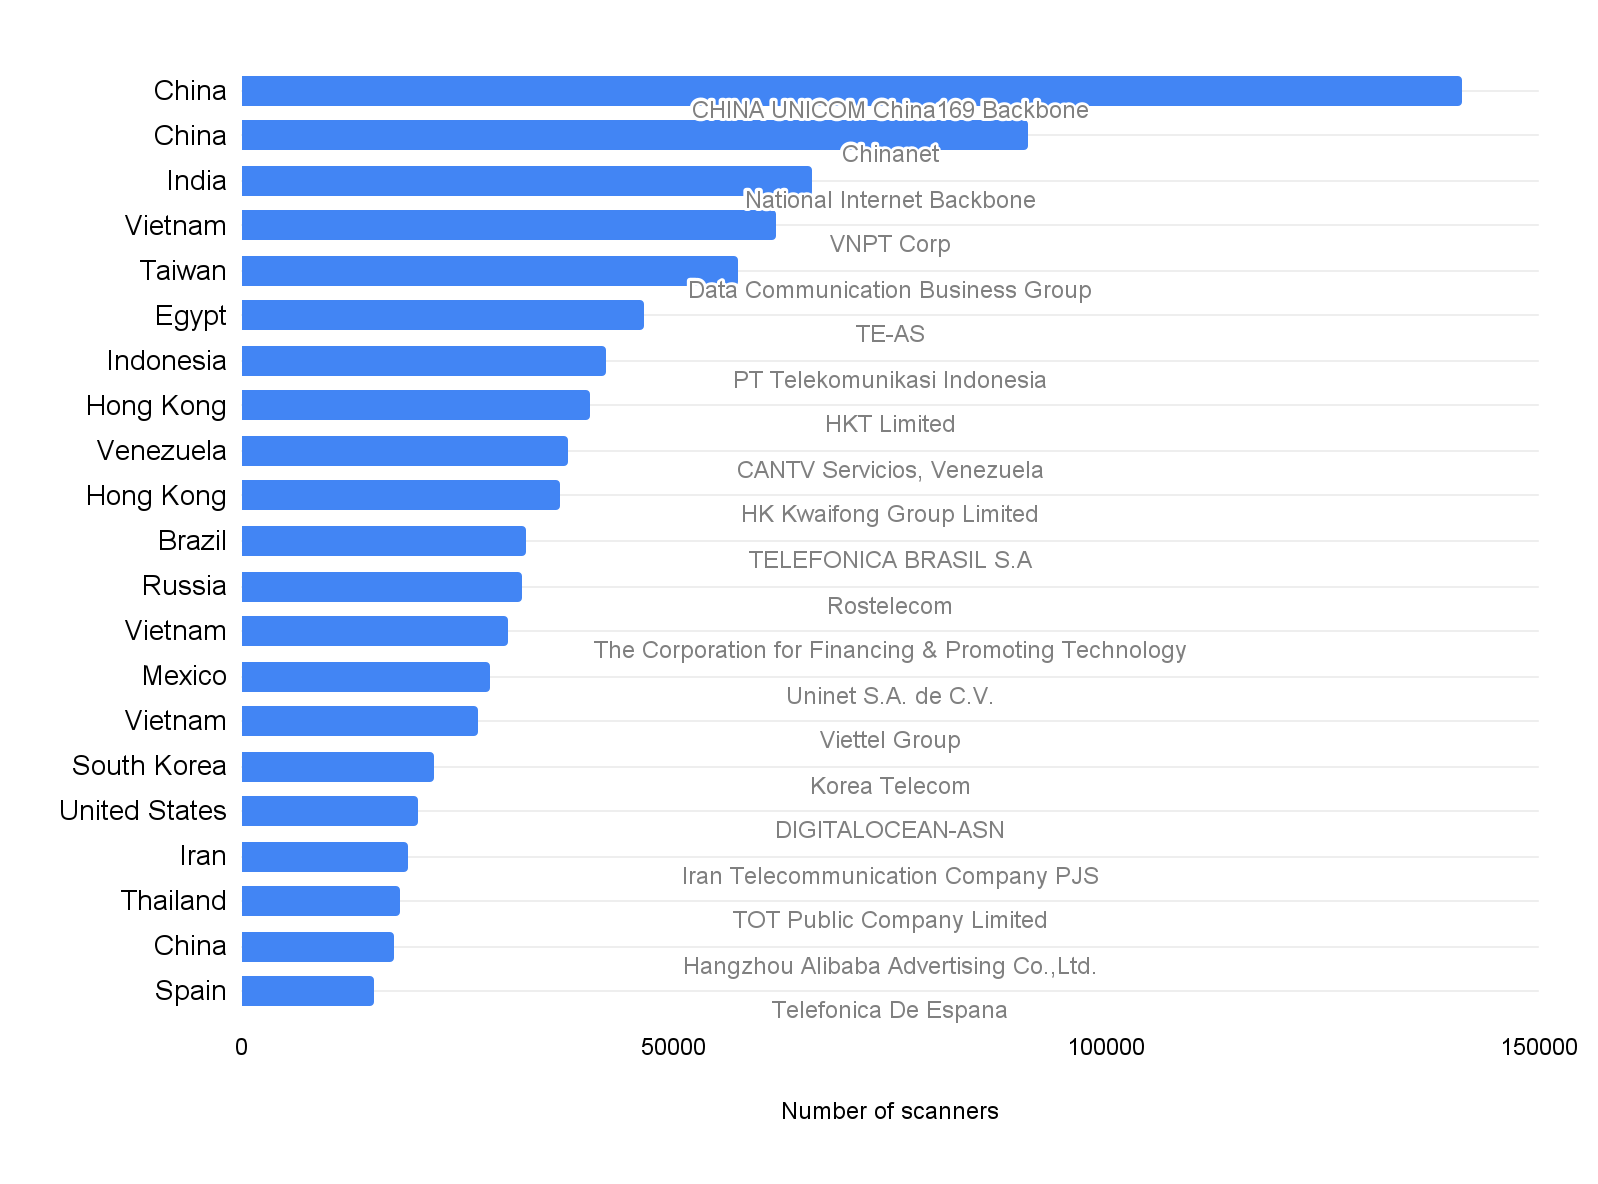 Top 20 ISPs where the largest number of scanner IPs originated. In order from largest to smallest, the list is: China Unicom China 169 Backbone, Chinanet, National Internet Backbone, VNPT Corp, Data Communication Business Group, TE-AS, PT Telekonumikasi Indonesia, HKT Limited, CANTV Servicios, Venezuela, HK Kwaifong Group Limited, Telefonica Brasil S.A., Rostelecom, The Corporation for Financing & Promoting Technology, Uninet S.A. de C.V., Viettel Group, Korea Telecom, Digital Ocean-ASN, Iran Telecommunication Company PJS, TOT Public Company Limited, Hangzhou Alibaba Advertising Co. Ltd. and Telefonica de Espana. 